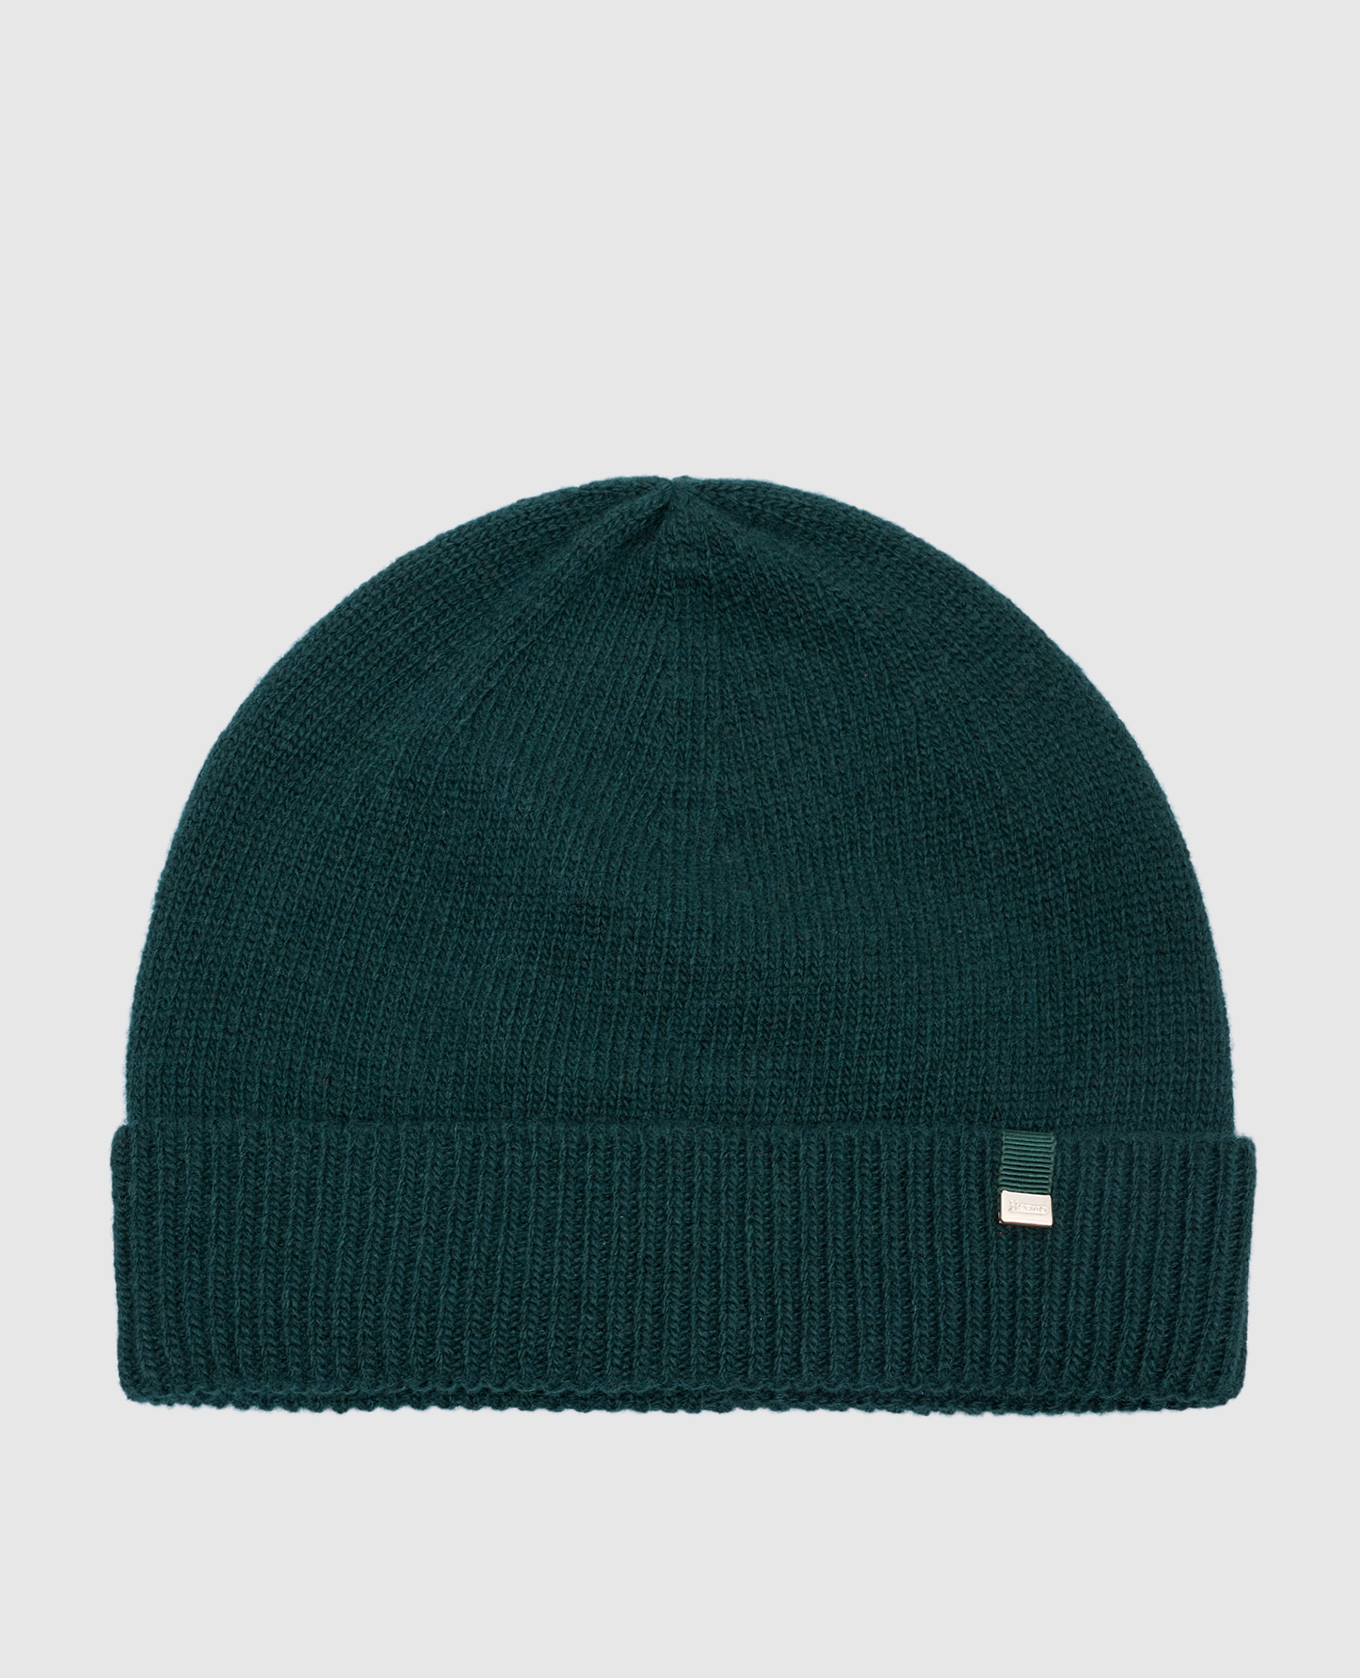 Green wool cap with logo